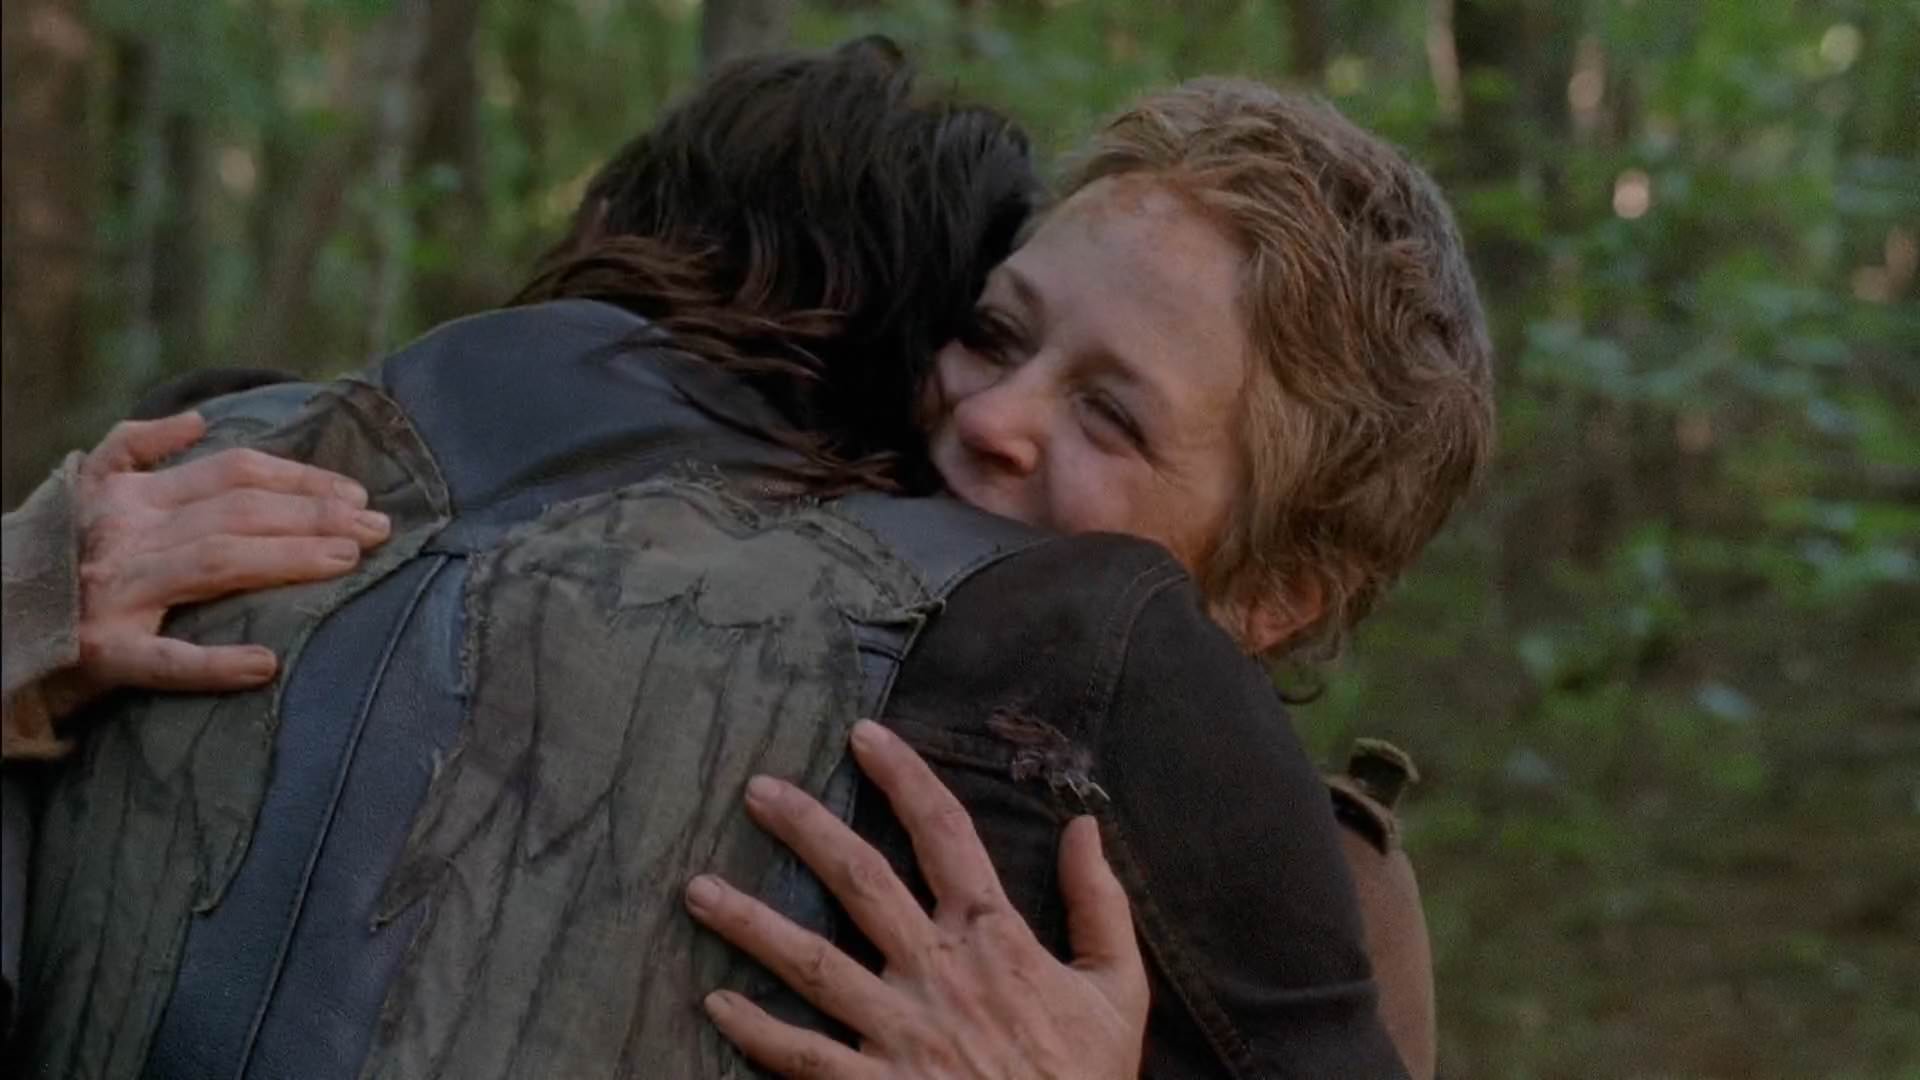 Top 10 Carol and Daryl moments on The Walking Dead - Undead Walking